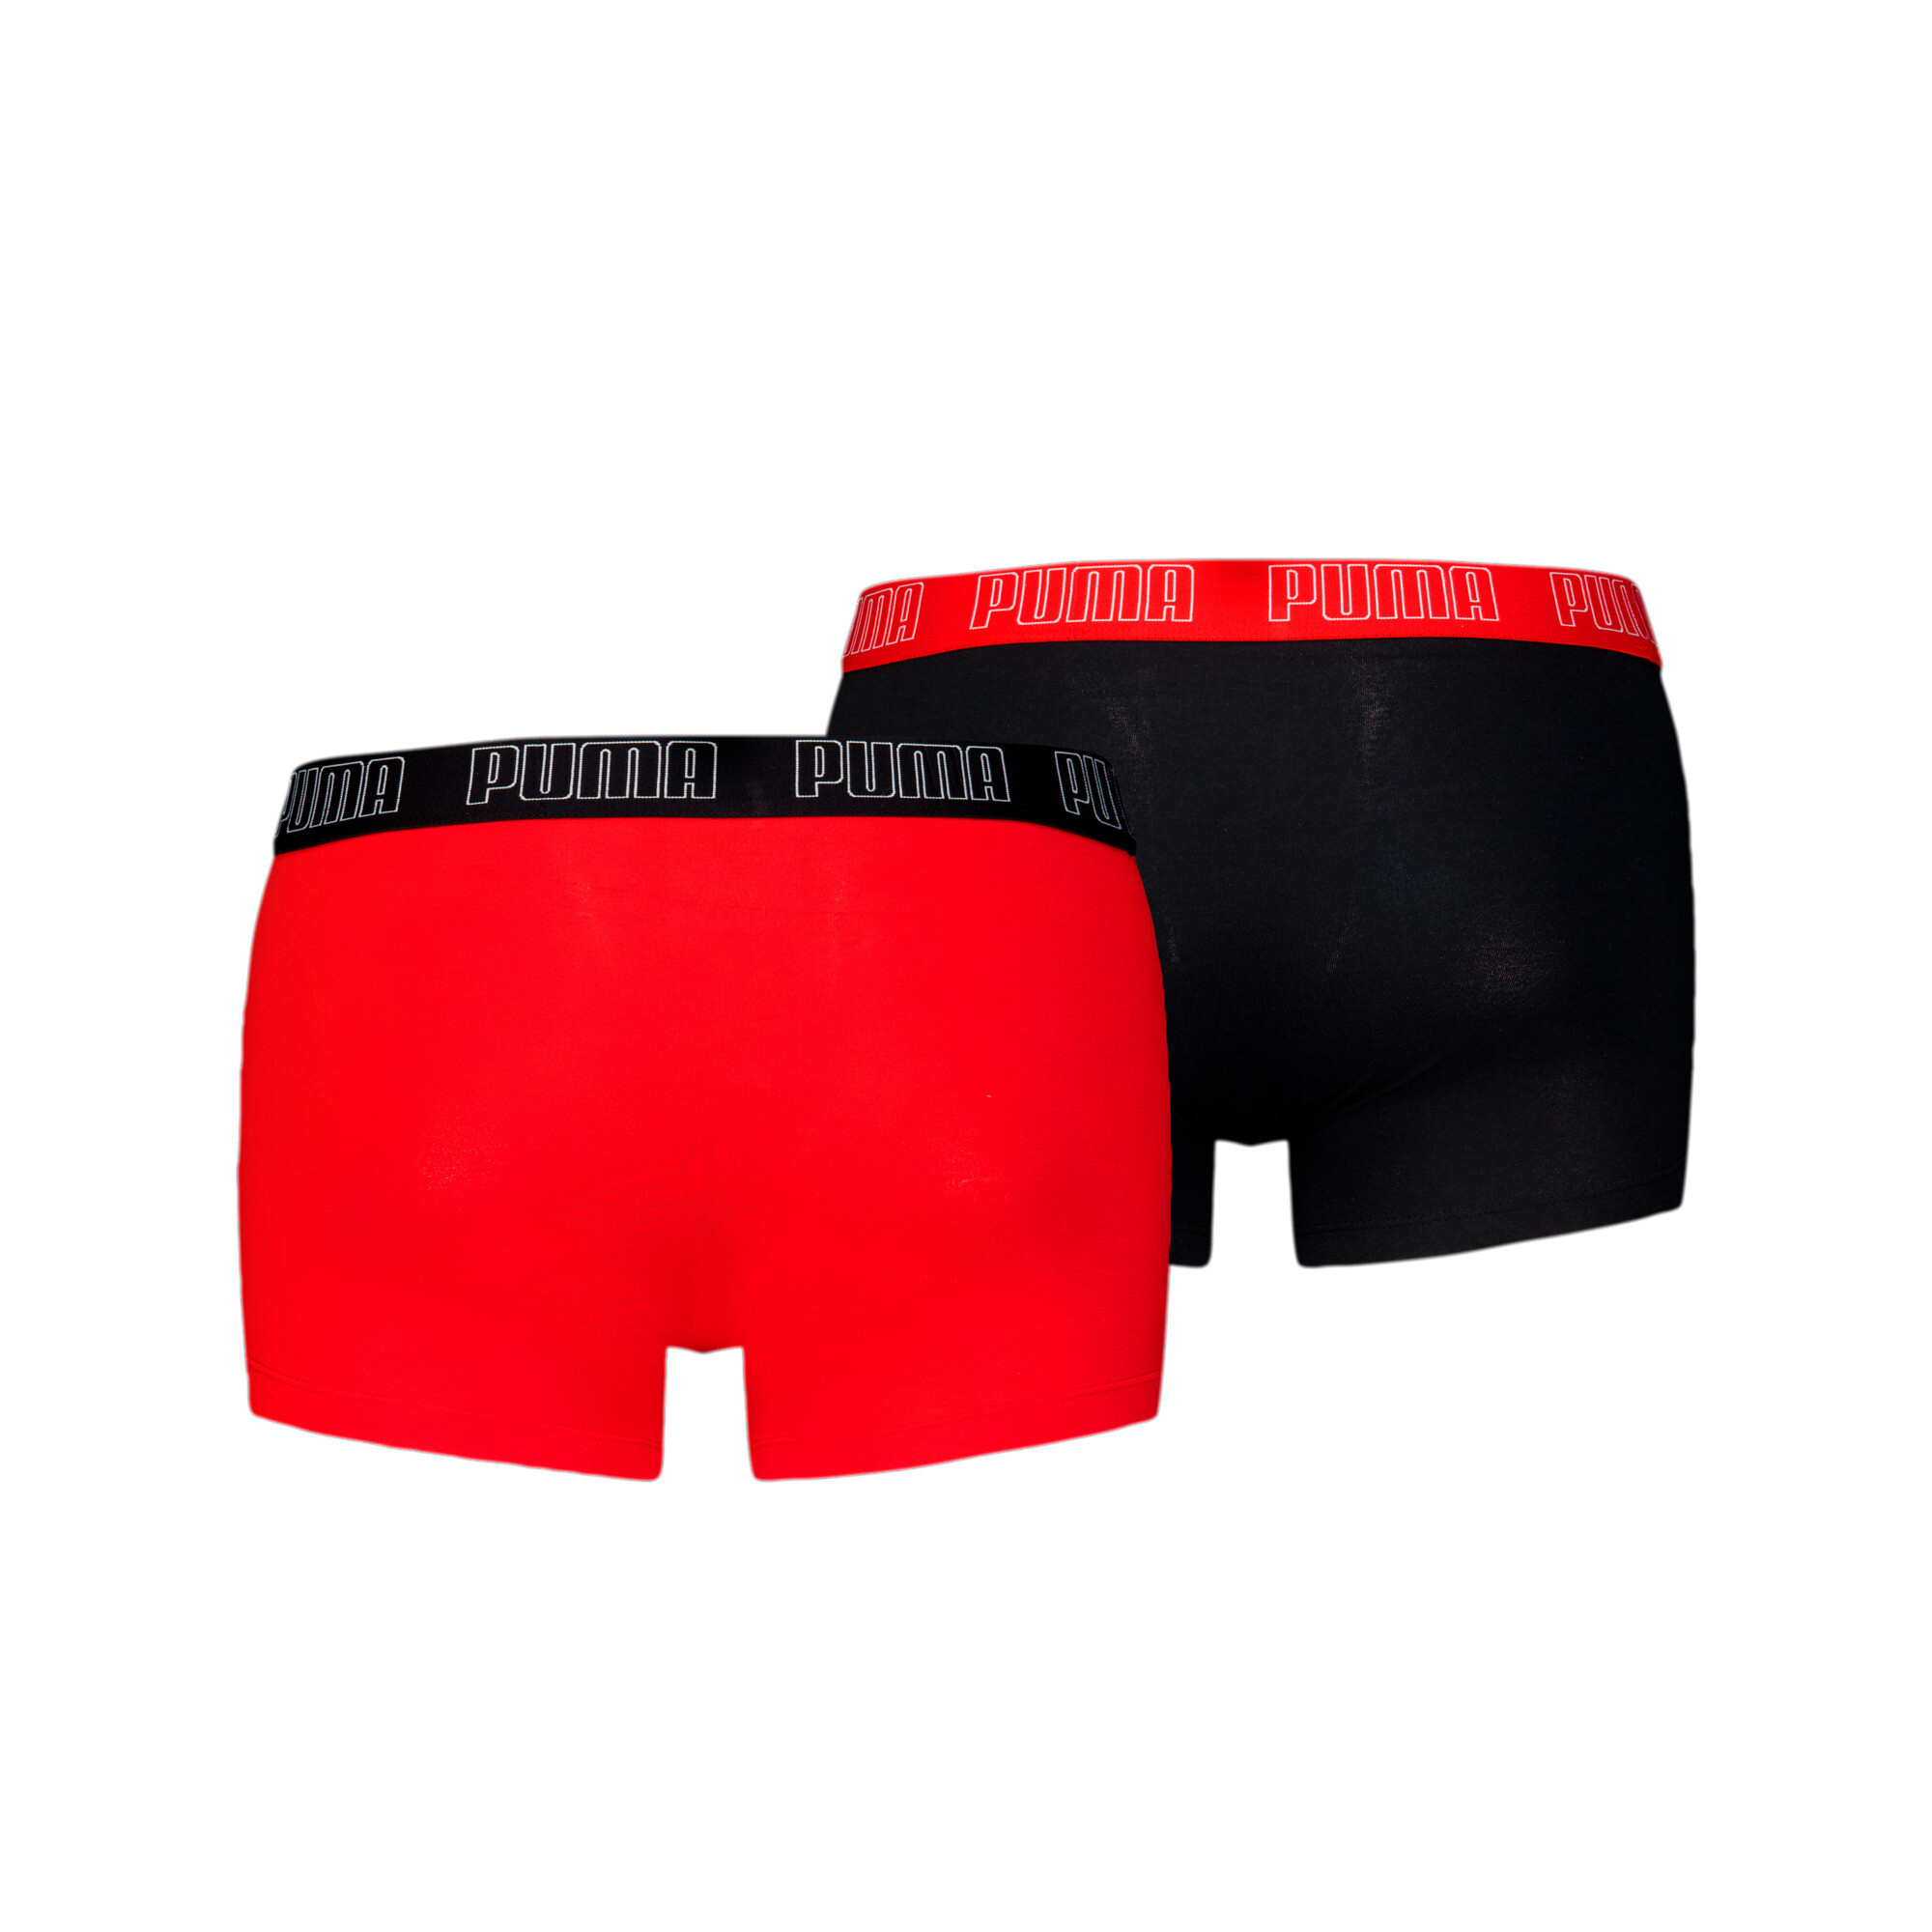 Men's Puma's Trunks 2 Pack, Red, Size 5, Clothing